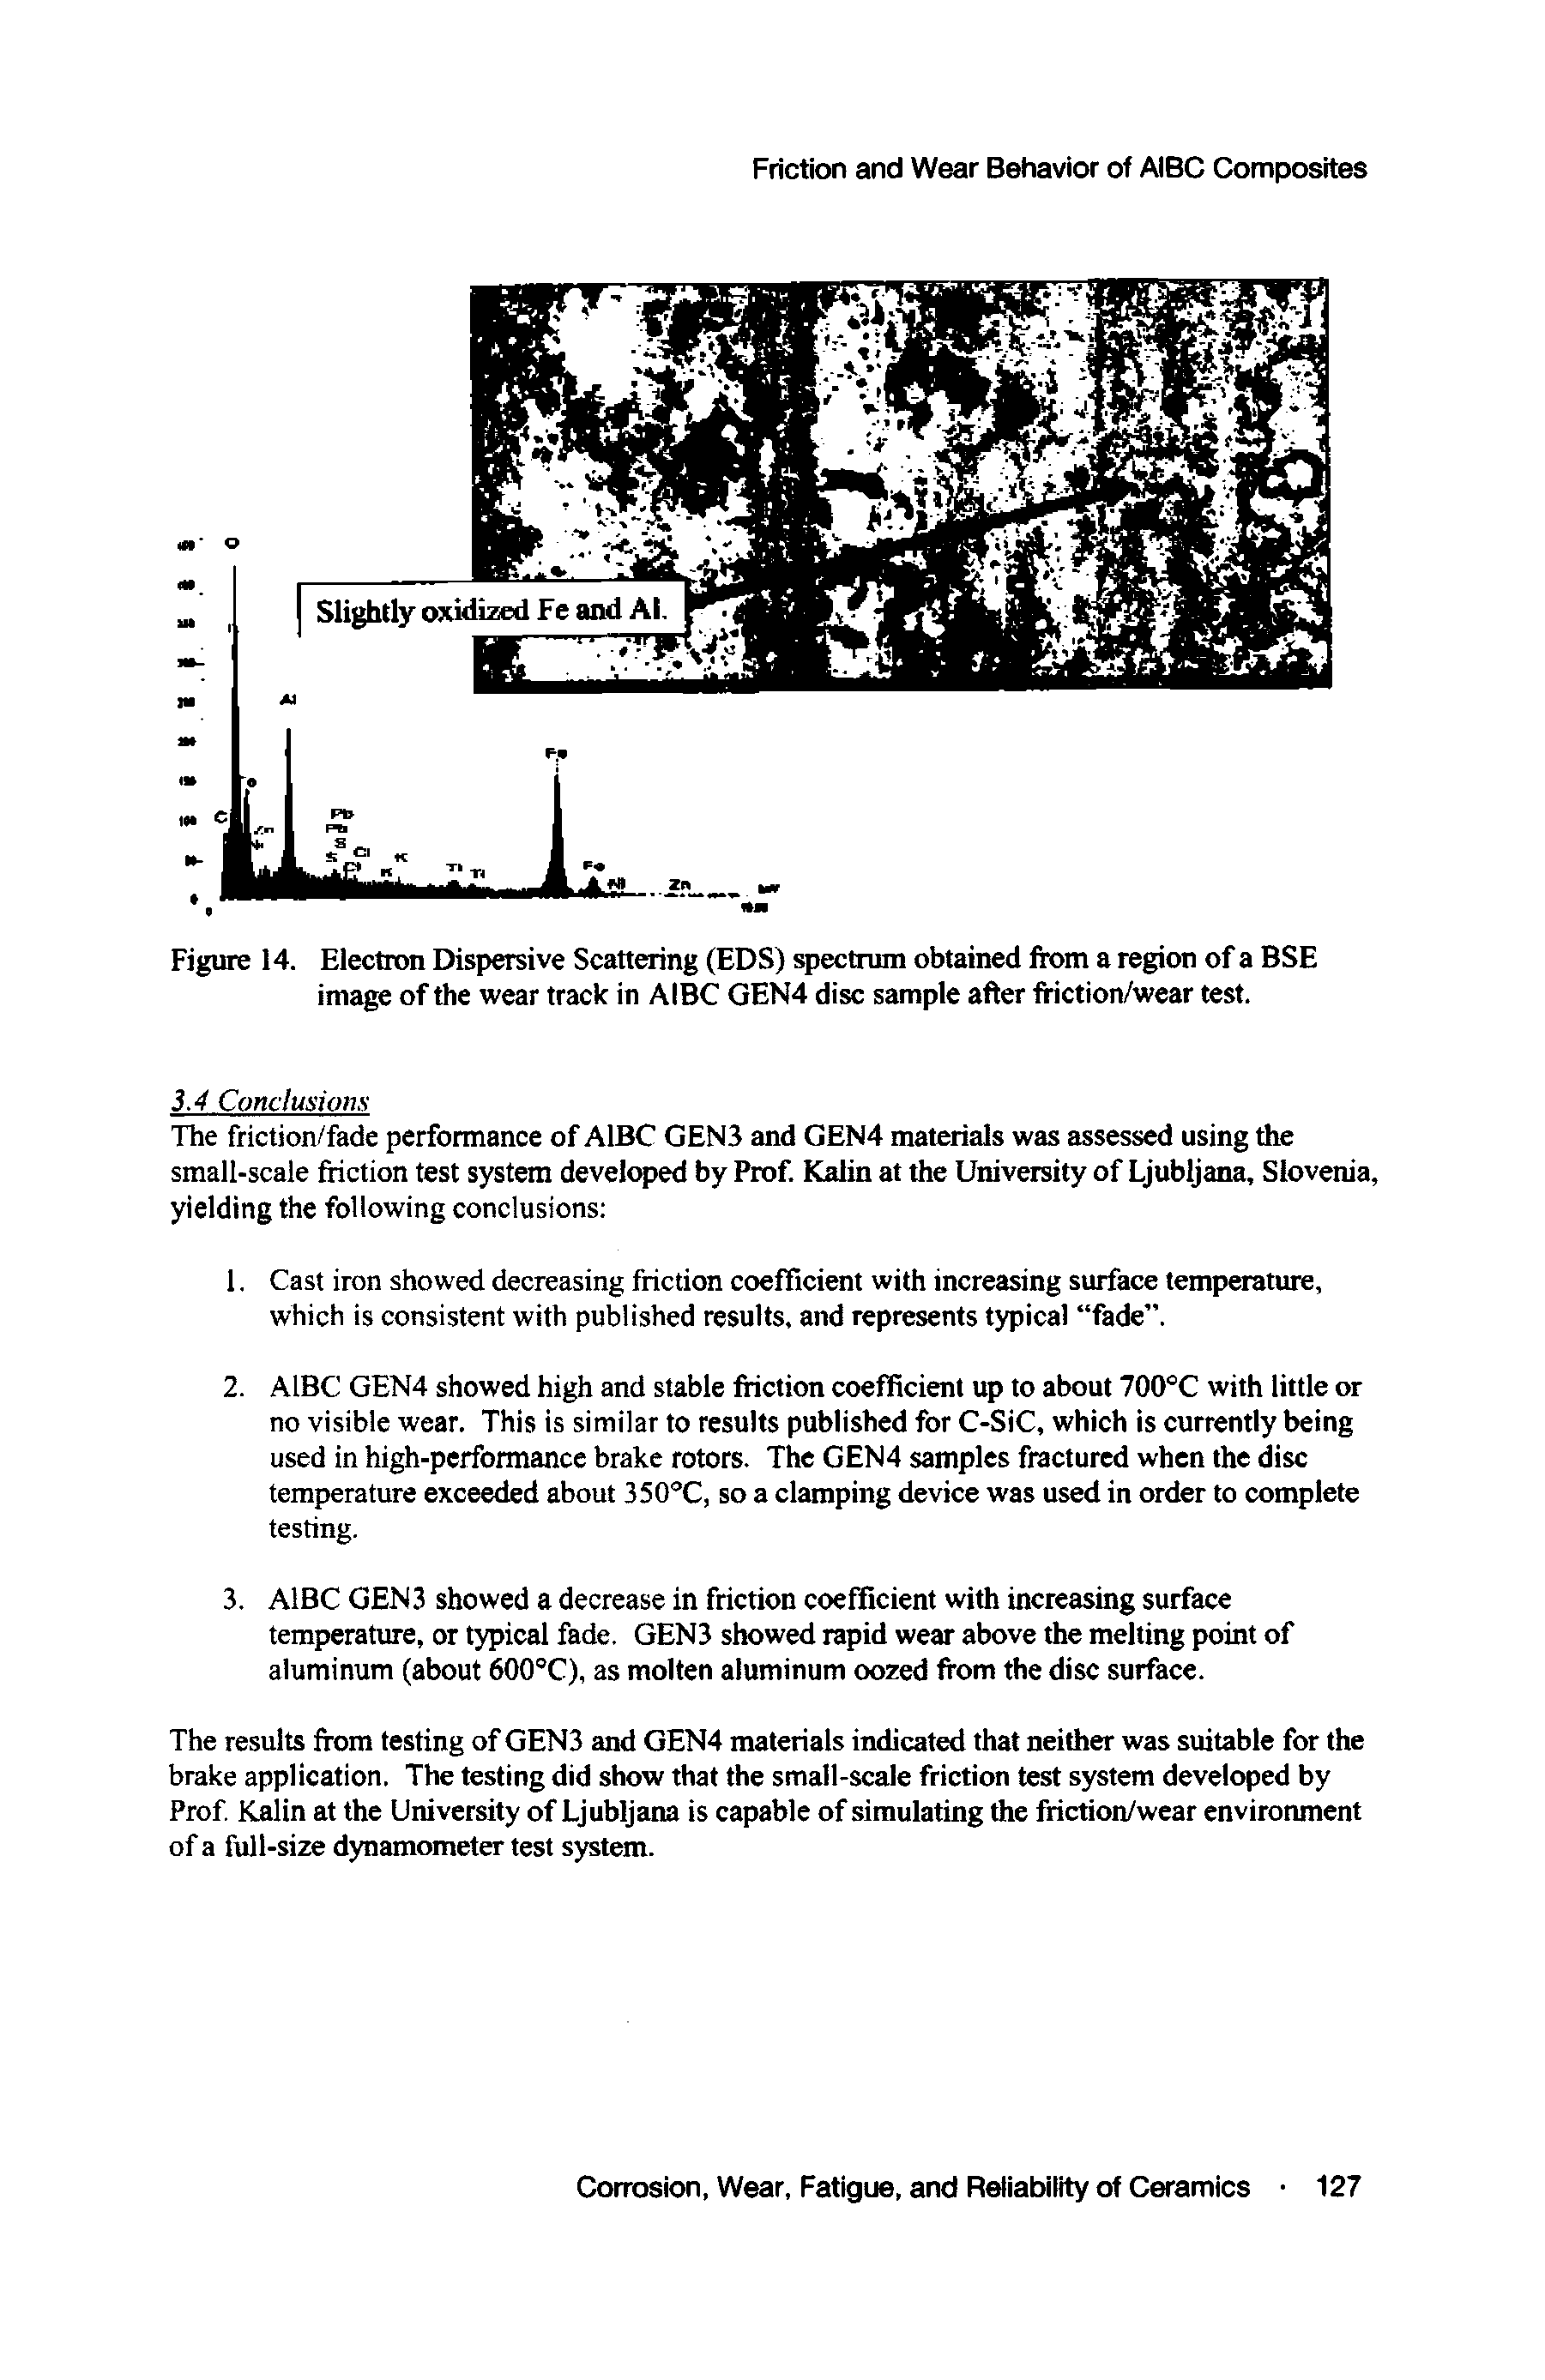 Figure 14. Electron Dispersive Scattering (EDS) spectrum obtained fix>m a region of a BSE image of the wear track in AIBC GEN4 disc sample after fnction/wear test.